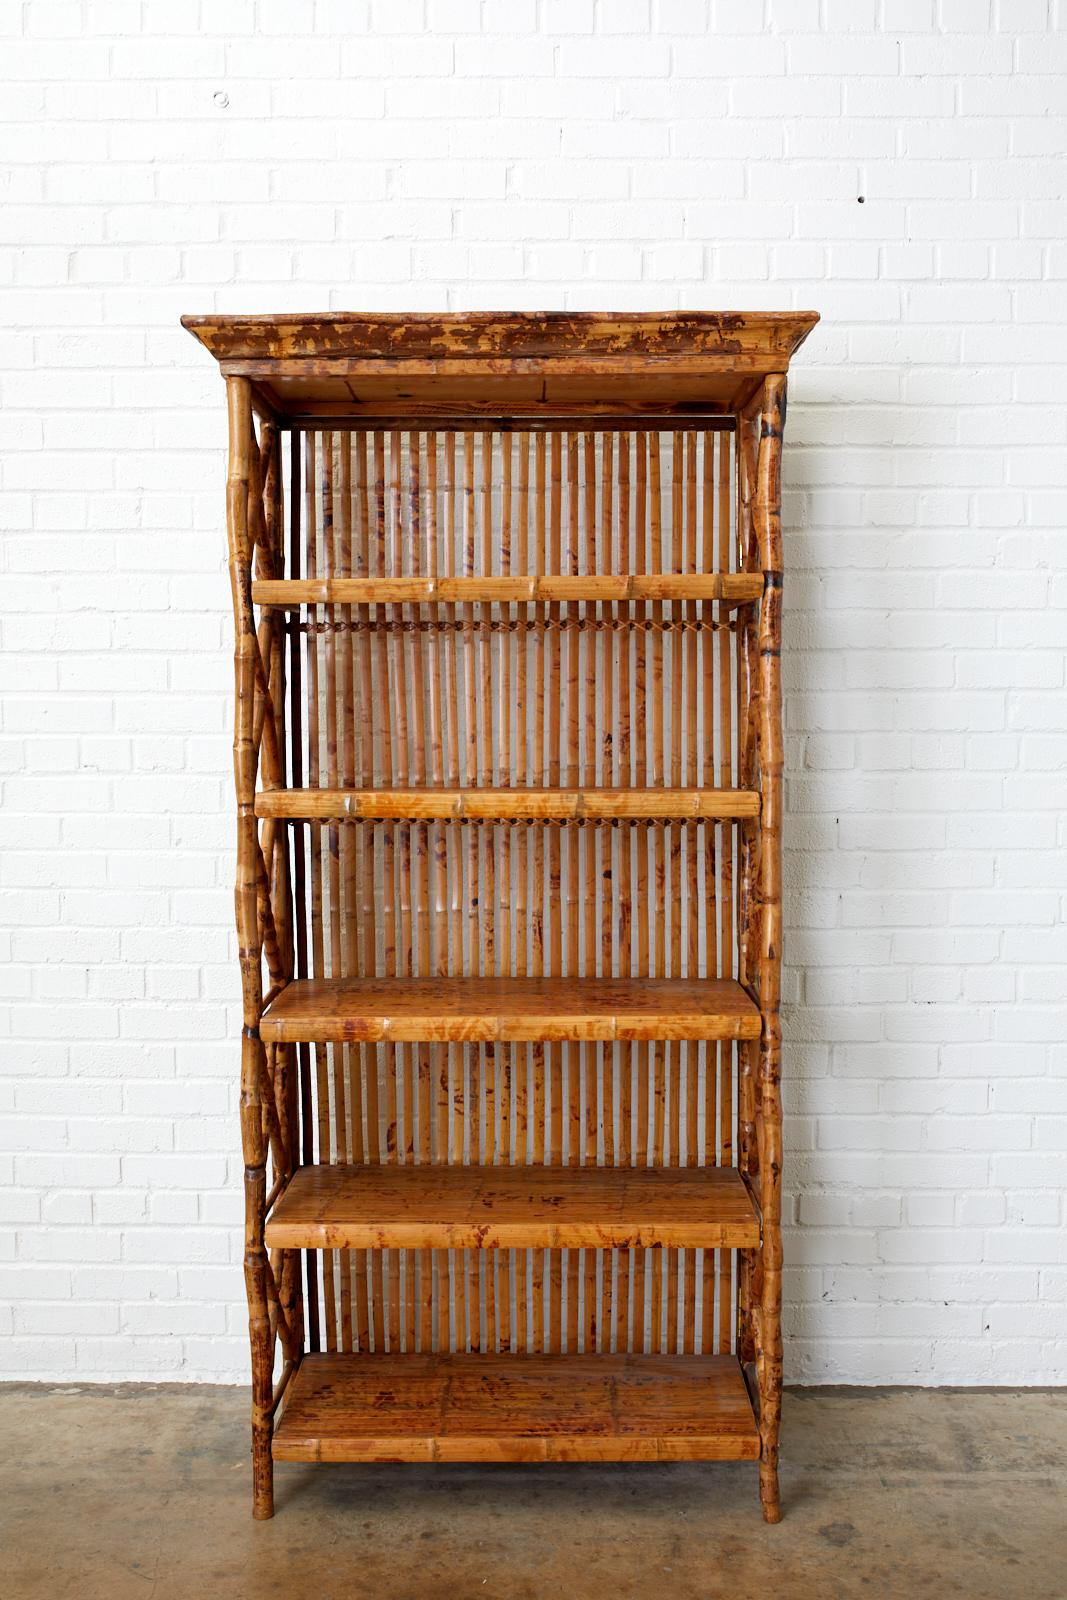 Gorgeous bamboo rattan five shelf étagère or bookcase made in the Hollywood Regency period. Beautifully crafted with tortoise style bamboo poles and a corniced top. Features X-form supports on the sides. Each shelf is decorated with split bamboo and